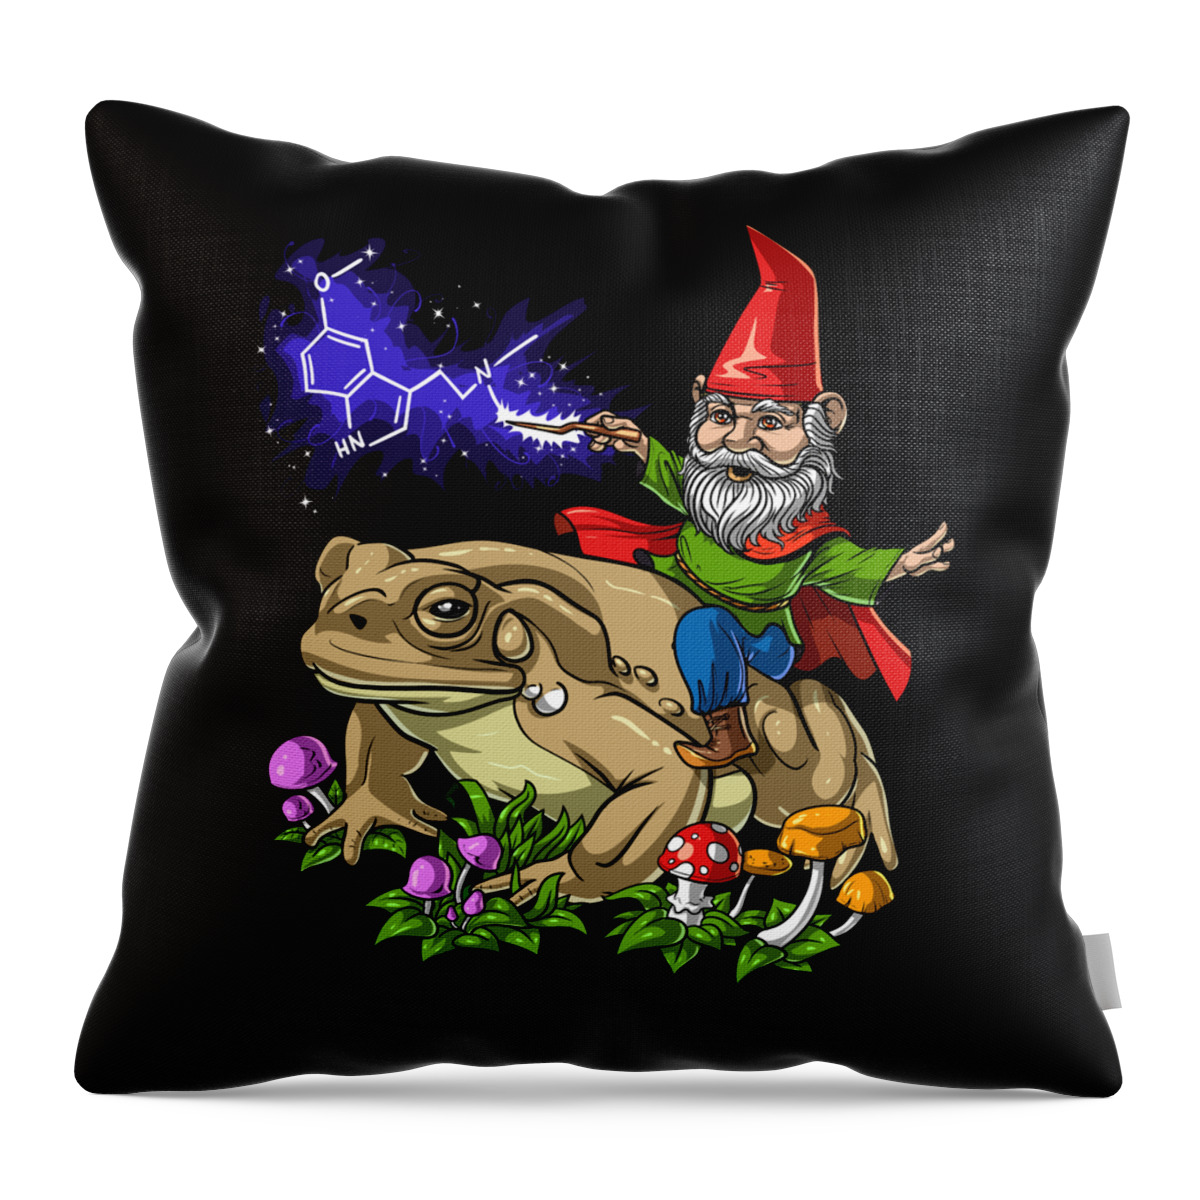 5 Meo Dmt Throw Pillow featuring the digital art Bufo Alvarius Toad Gnome by Nikolay Todorov